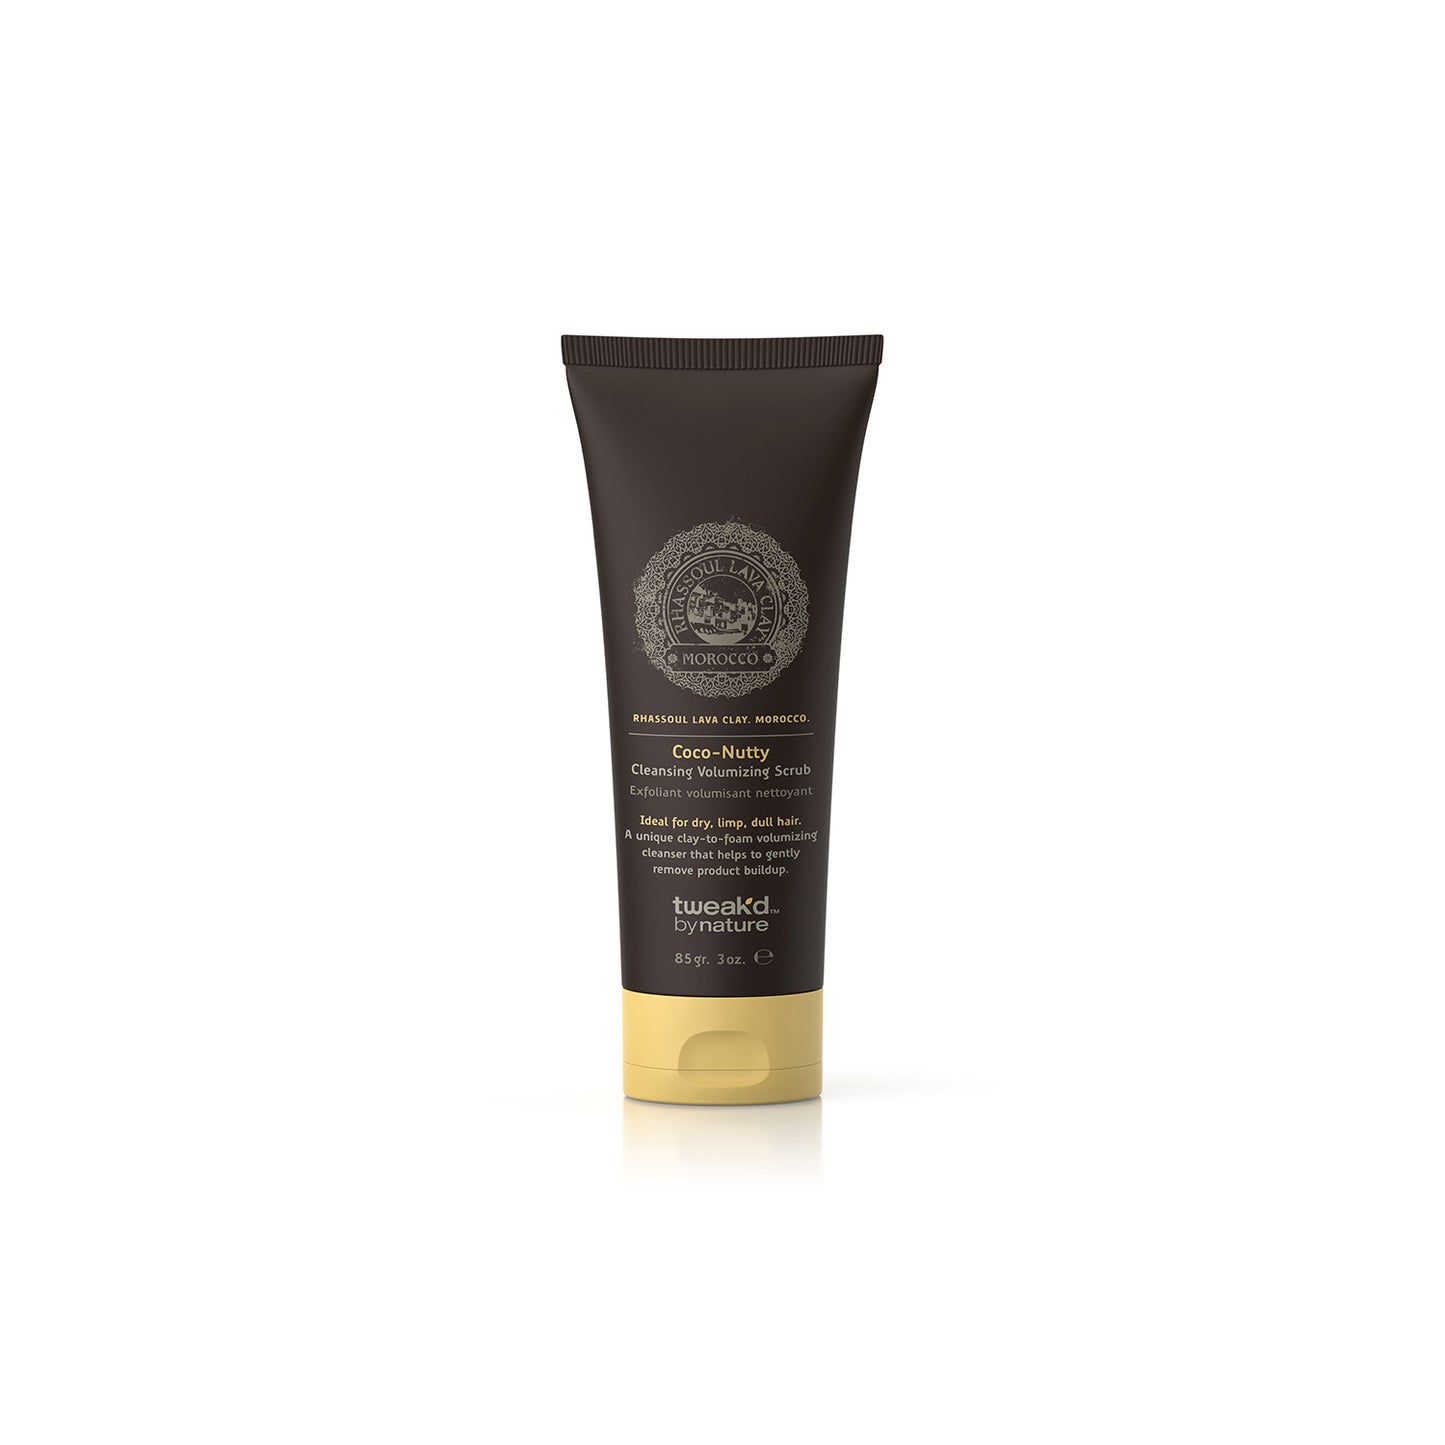 Tweak'd by Nature Coco-Nutty Hair Cleansing Treatment